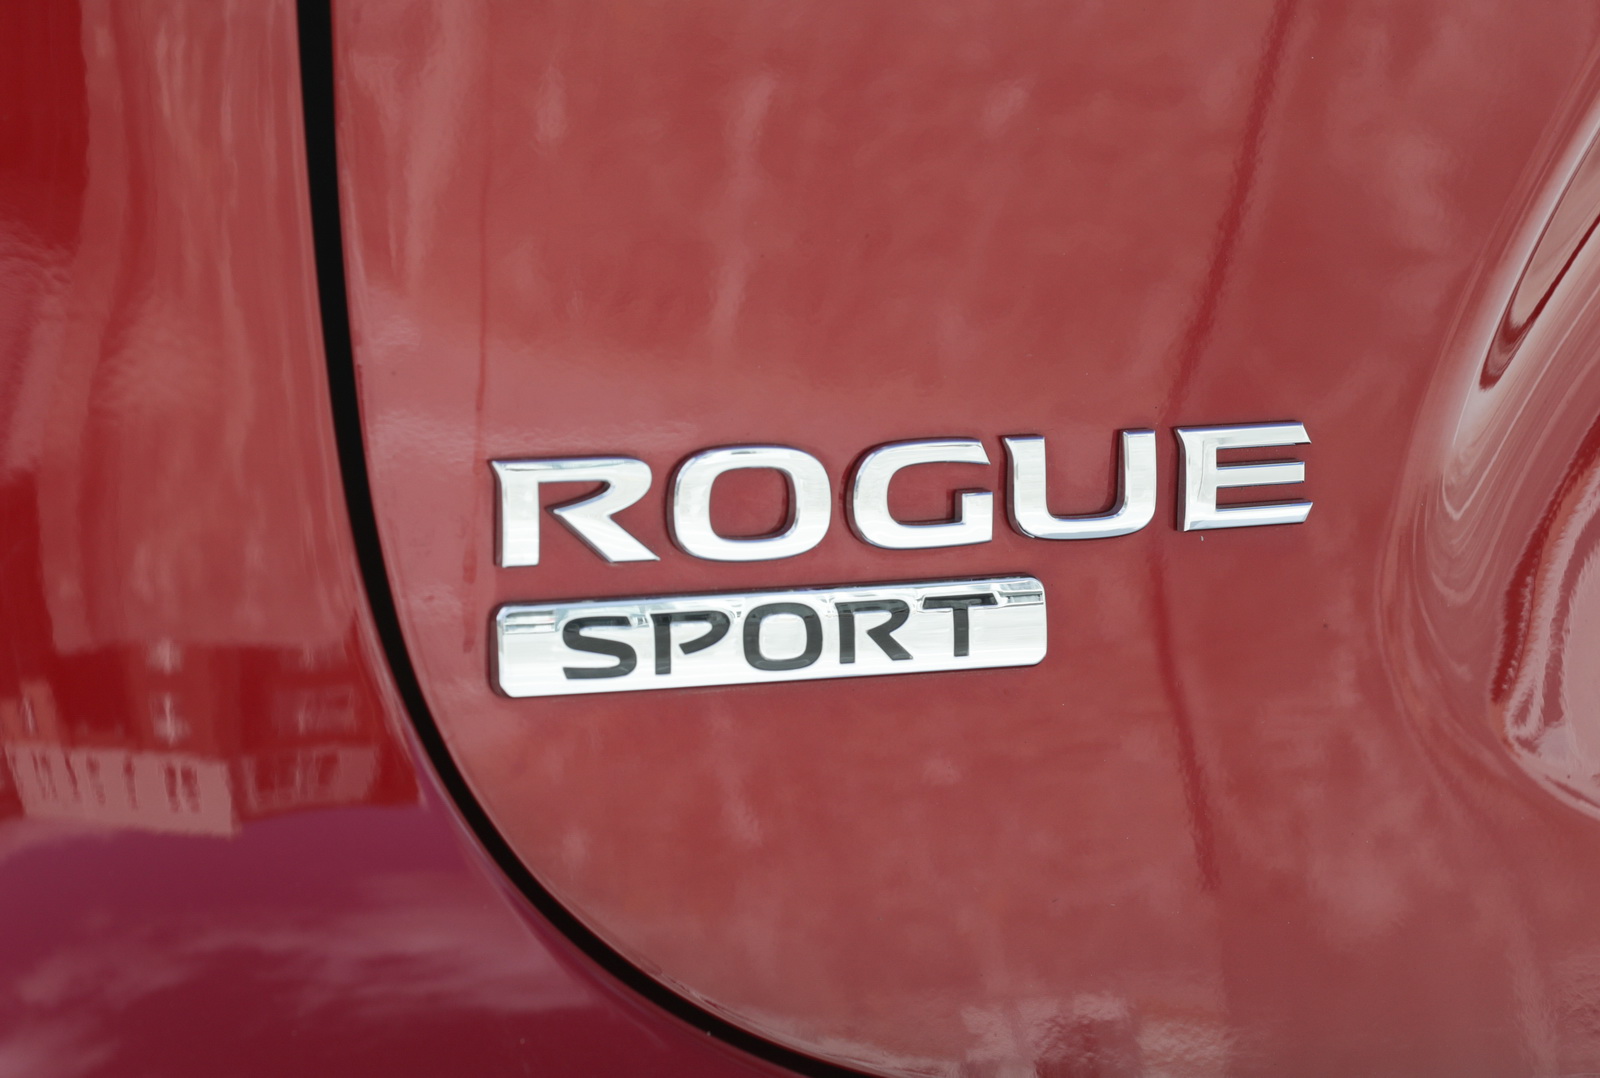 2018 Nissan Rogue Sport Goes On Sale Virtually Unchanged From $22,615 ...